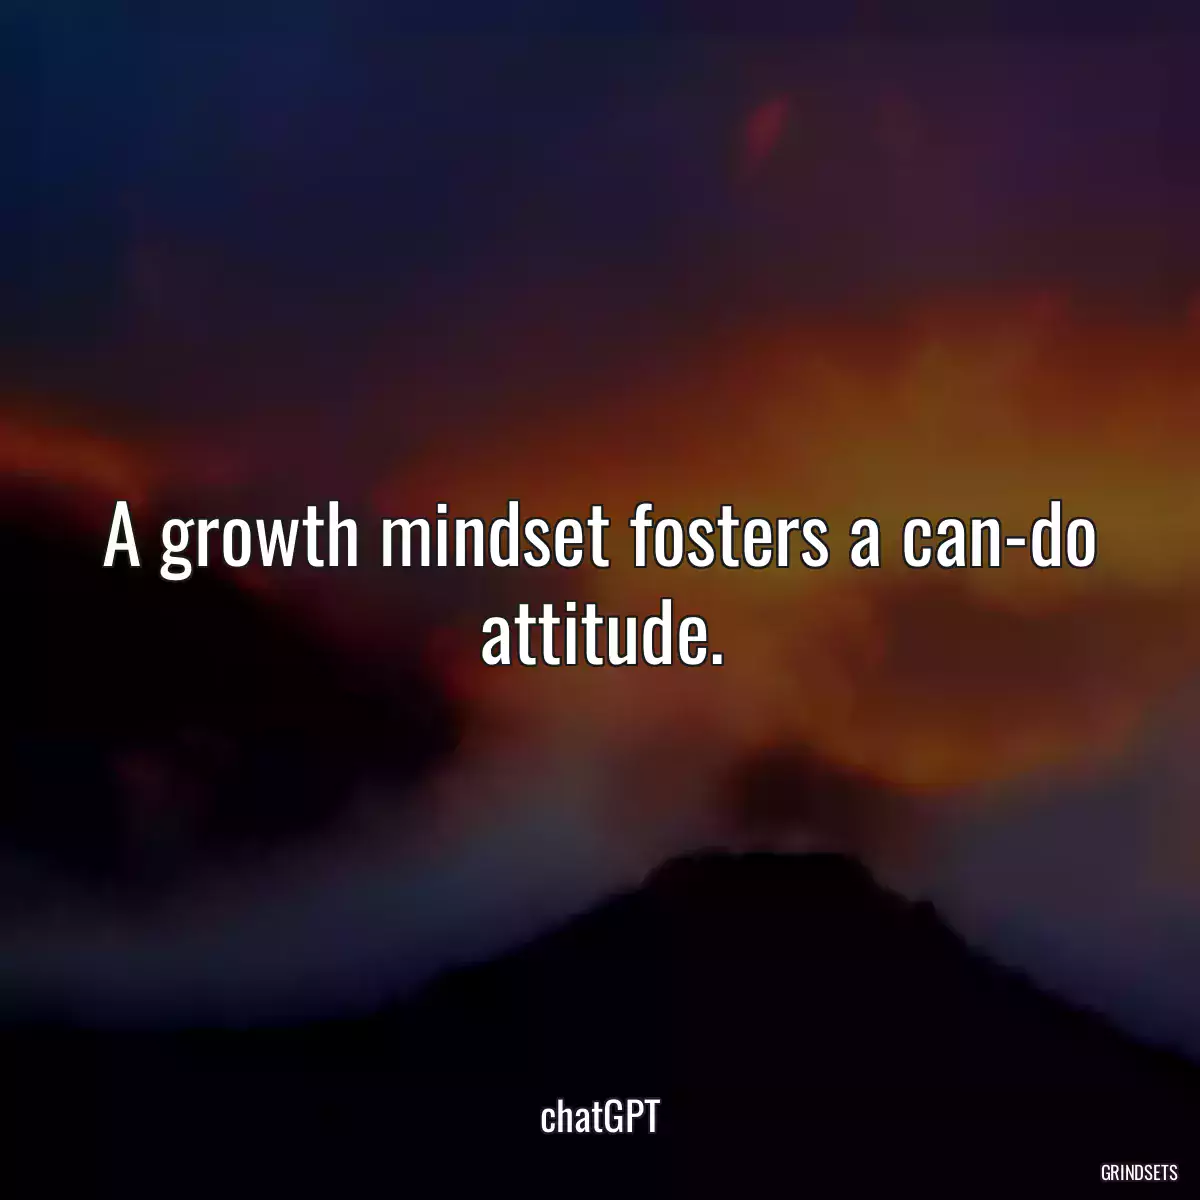 A growth mindset fosters a can-do attitude.